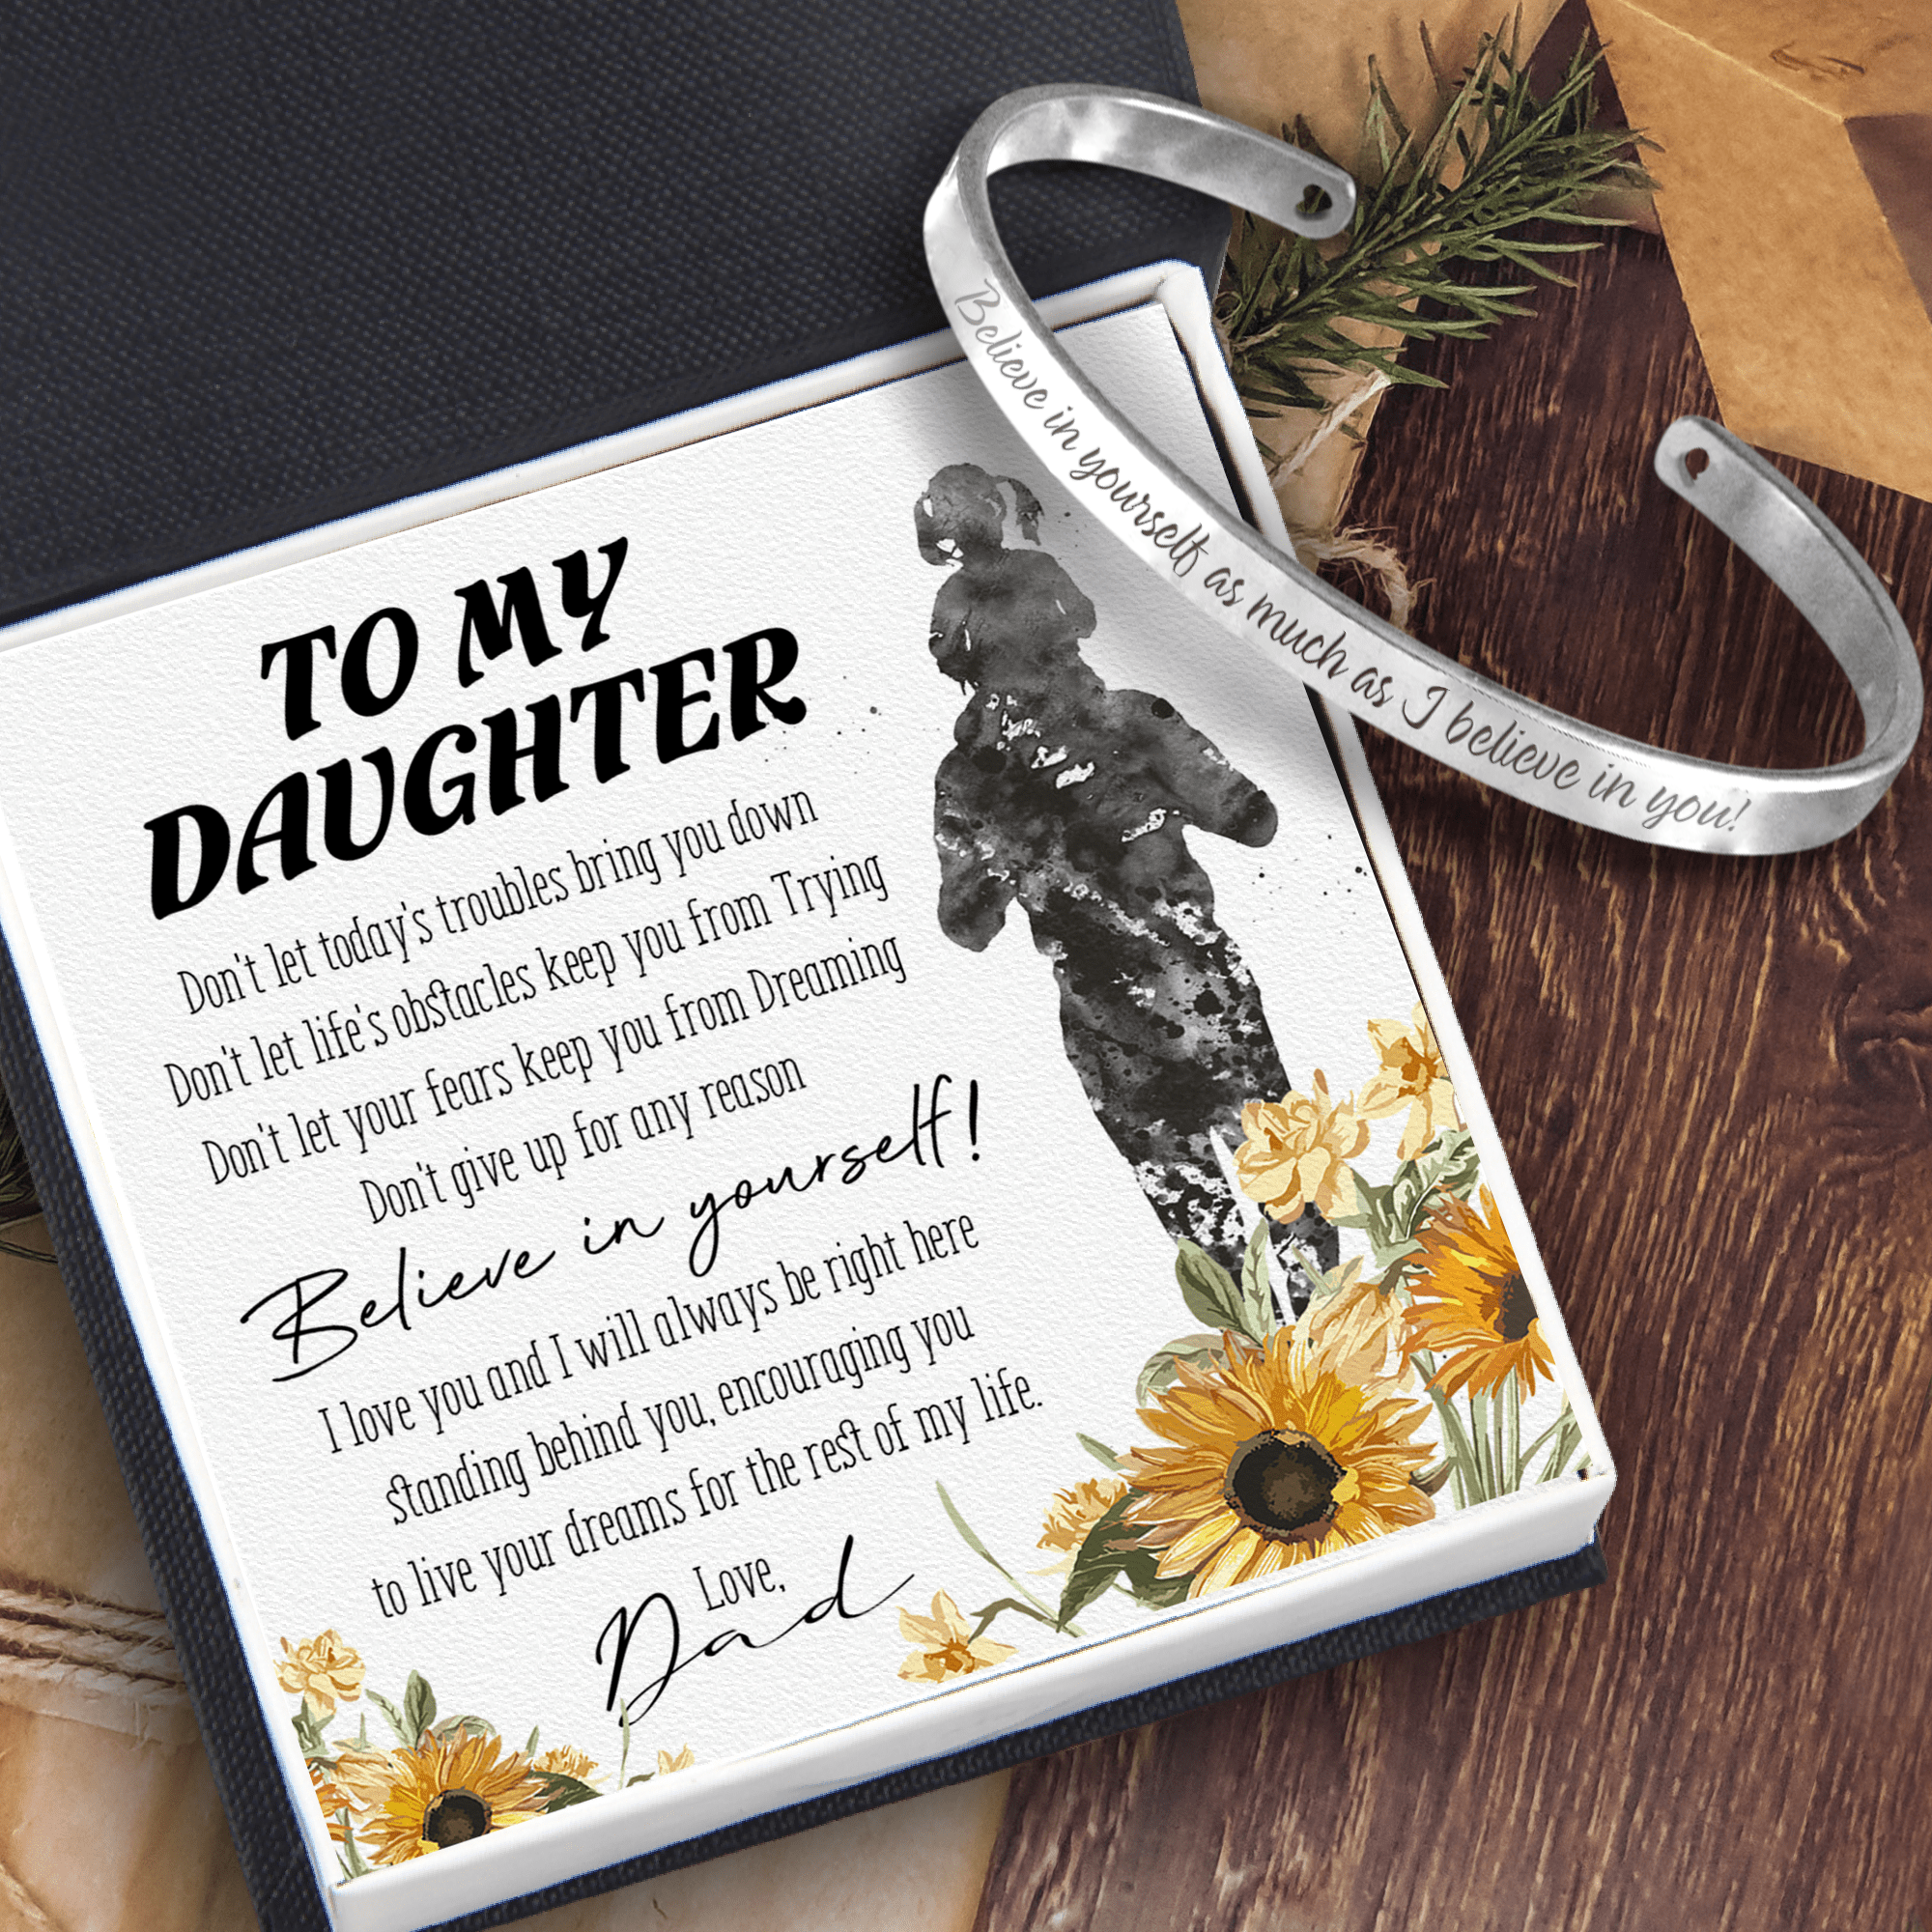 Daughter's Bracelet - Family - To My Daughter - Believe In Yourself - Gbzf17019